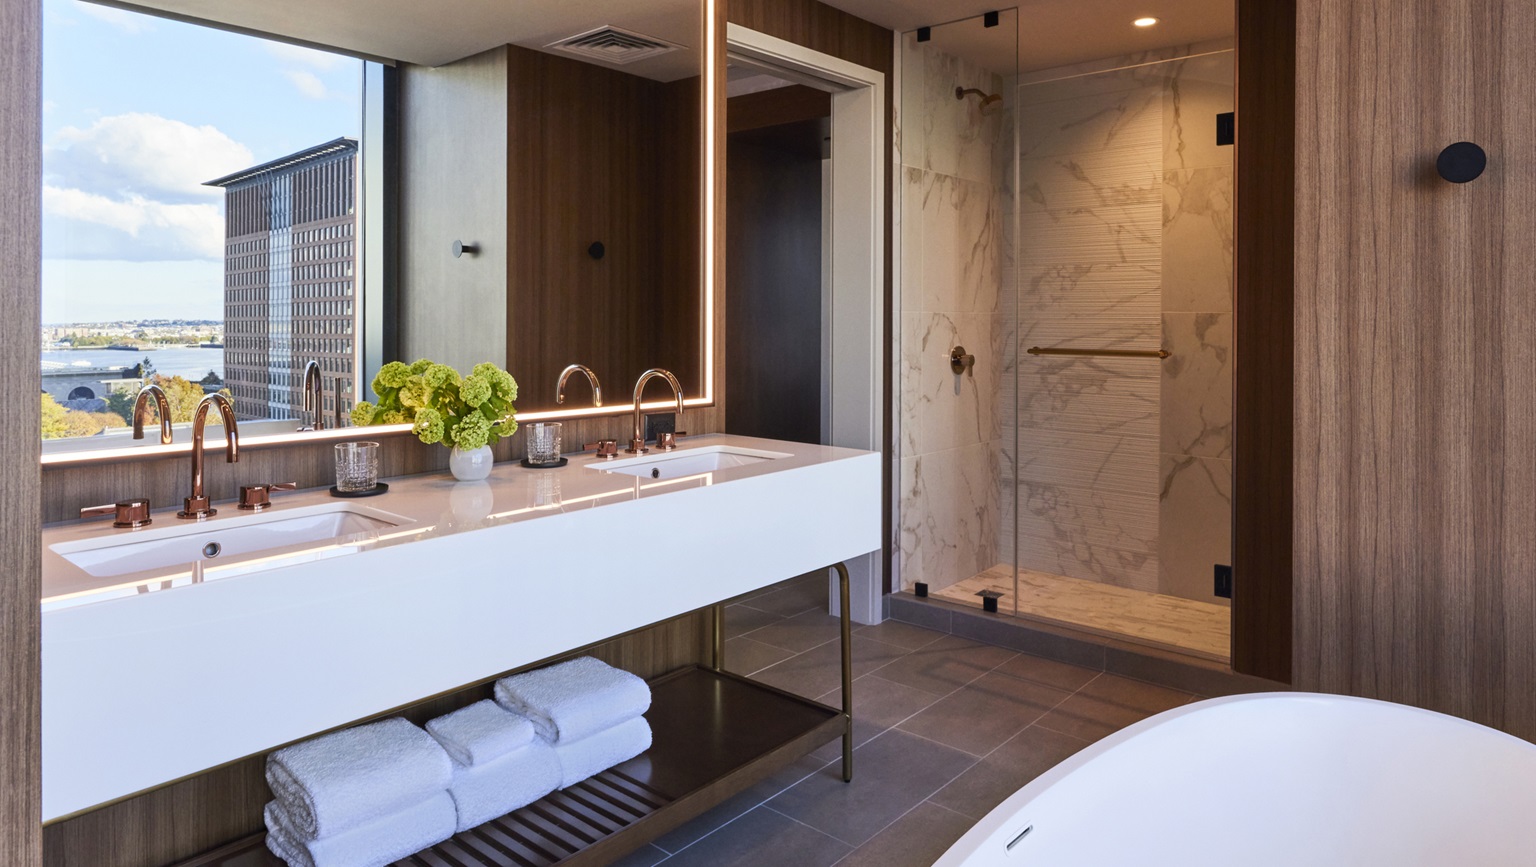 Junior King Suites boast spacious bathrooms with elegant finishes, a walk-in shower and soaking tub - Omni Boston Hotel at the Seaport